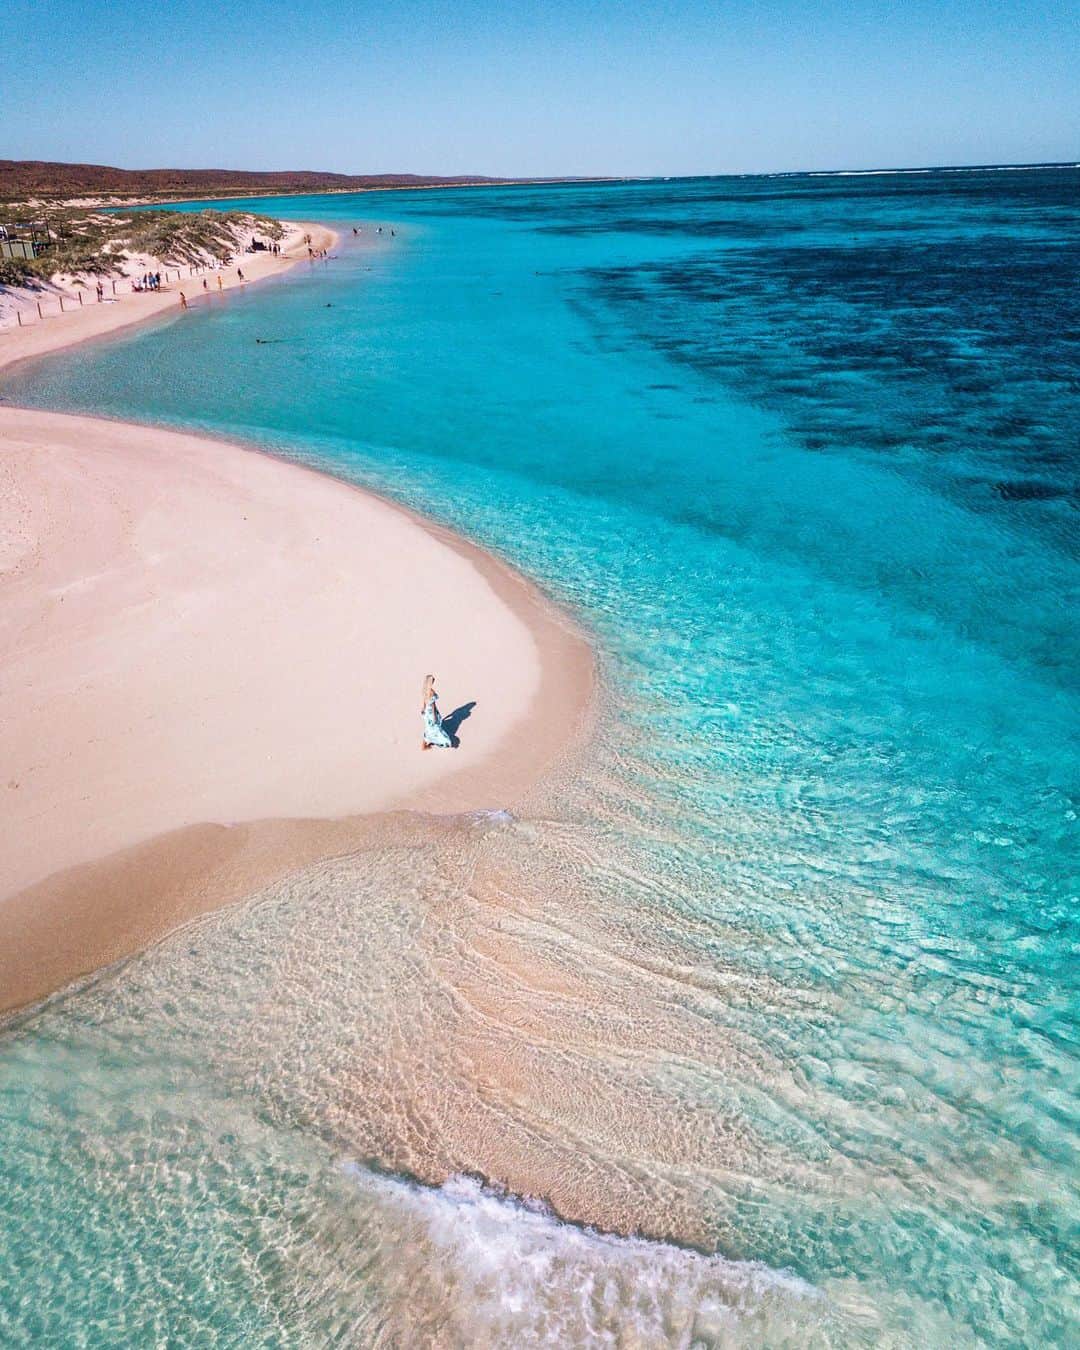 のインスタグラム：「Happy #WorldEnvironmentDay from Ningaloo reef, one of the last truly wild, pristine places on this earth that needs to be protected 🐋  Ningaloo reef is a World Heritage listed area and it has a synergistic relationship with Exmouth gulf, a place that needs to be included in World Heritage status to prevent industrialization and maintain protection for this entire region 🐋   Exmouth gulf acts as a nursery and foraging grounds for one of the worlds largest populations of migrating humpback whales. It’s also home to a large population of dugongs, a diverse range of fish species (approx 850 compared to 550 in Ningaloo reef) and many threatened and protected species - snubfin, humpback and bottlenose dolphins, hawksbill turtles, baby giant shovel nose rays, leopard whip rays and manta rays. It’s one of few sites in the world where the endangered green sawfish give birth. Exmouth gulf has life creating habitats, mangroves, sea grass and coral that help to sustain Ningaloo reef. The two places are ecologically interdependent and both need continued protection.   Please check out the link in my bio to support the inclusion of Exmouth gulf in the World Heritage listing of Ningaloo reef to help prevent industrialization and keep this place wild and flourishing for generations to come 🐋  Swipe for a collection of images from my last trip to Ningaloo reef. I’m counting down the days now to be back in this natural paradise swimming with turtles 🐢 paddling with dolphins 🐬 watching whales 🐋 and soaking up this pristine wild nature 🌊  #WAtheDreamState #happyWAday #seeaustralia #Ningalooreef #australiascoralcoast #beautifuldestinations #worldenvironmentday #beatplasticpollution #turtles」